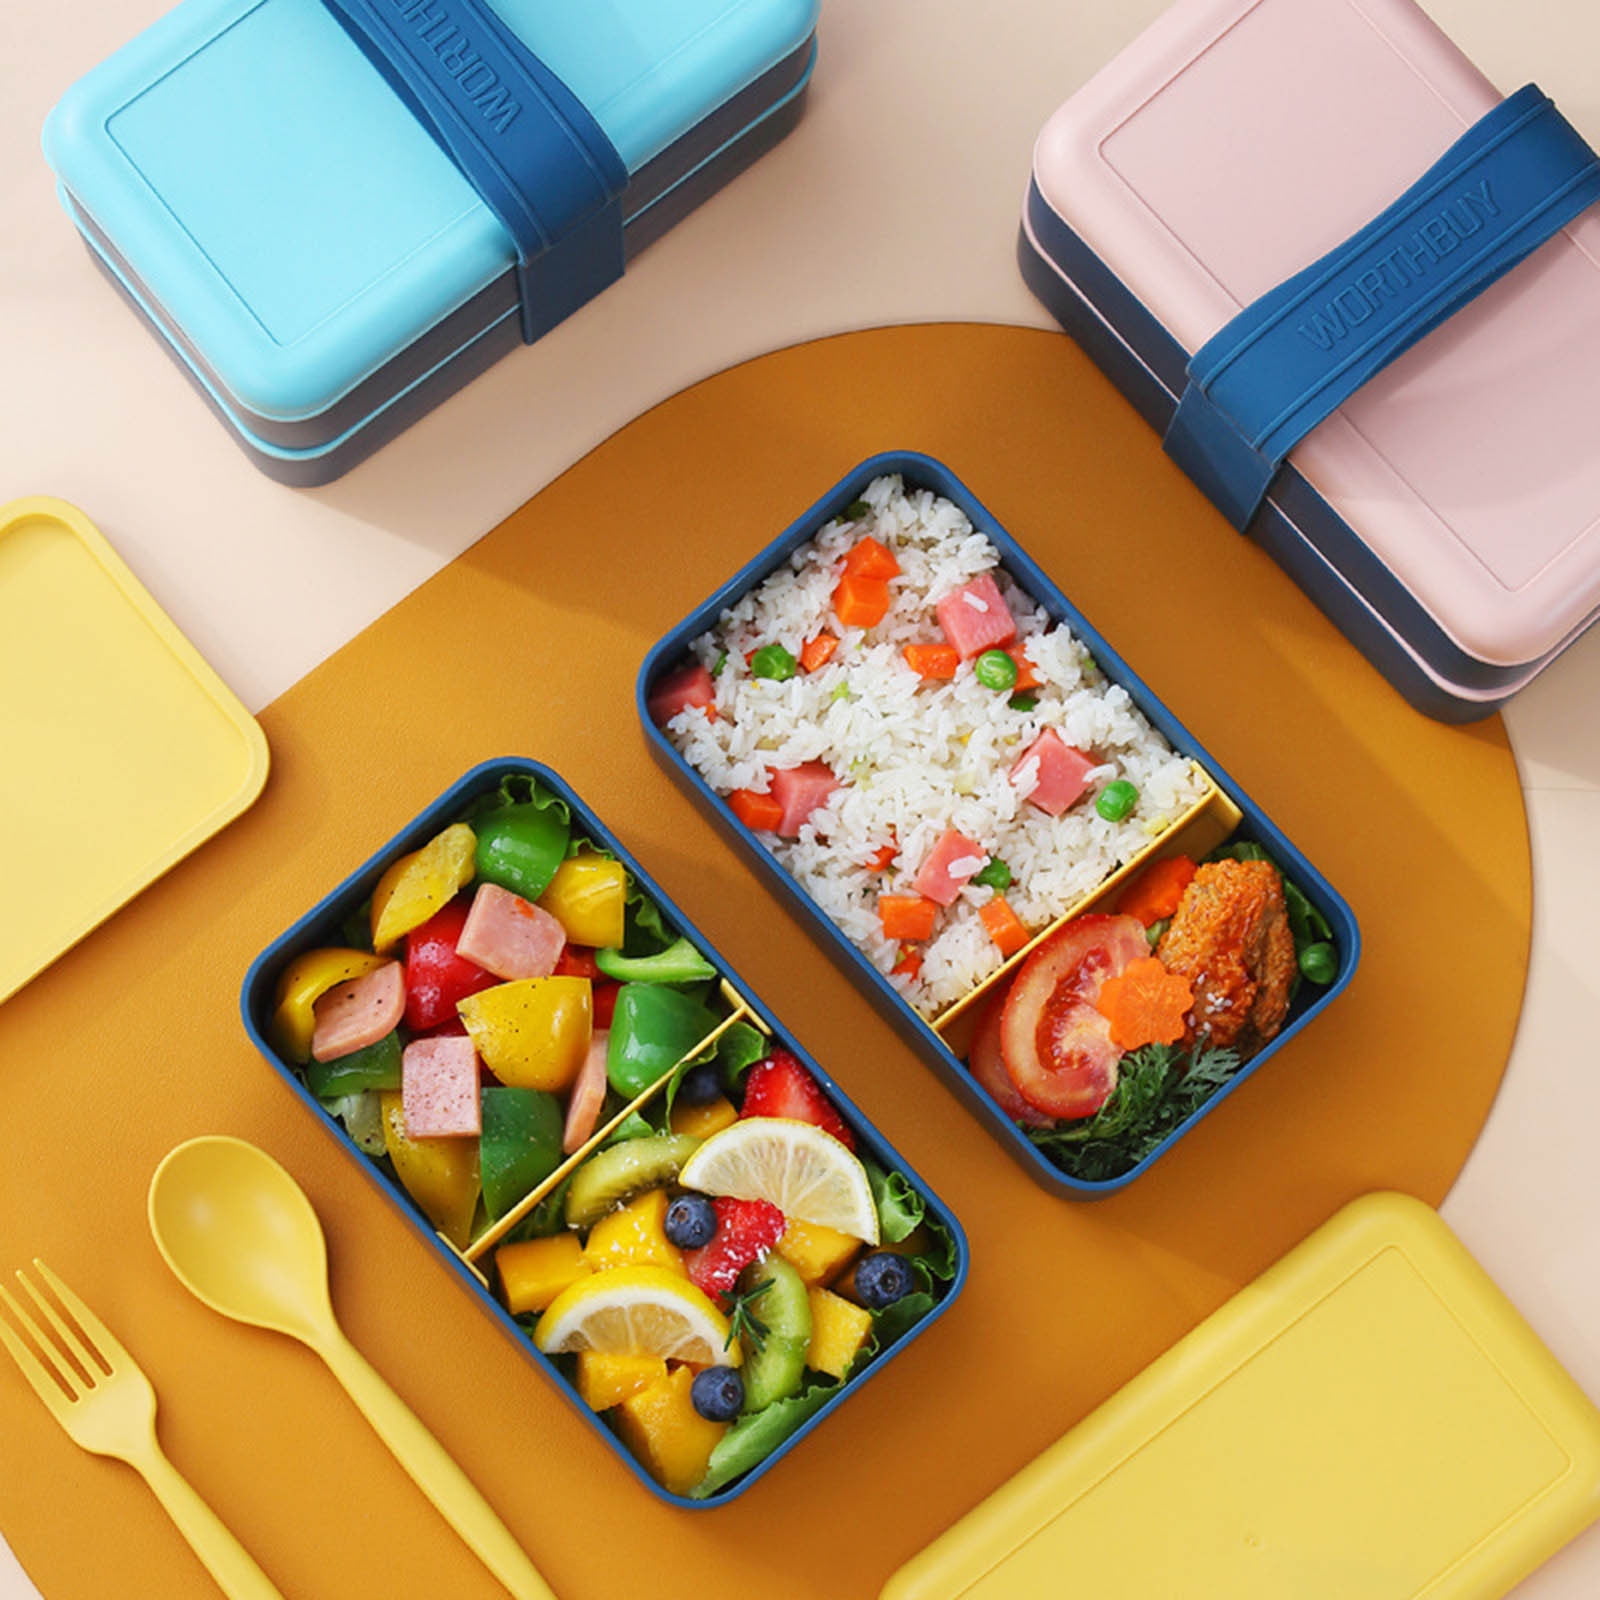 Xmmswdla Thermos Lunch Box for Kids Green Lunch Boxchildren'S Lunch Box Water Cup Set Sealed Leak-Proof Compartment Lunch Box Lunch Bento Box Adult